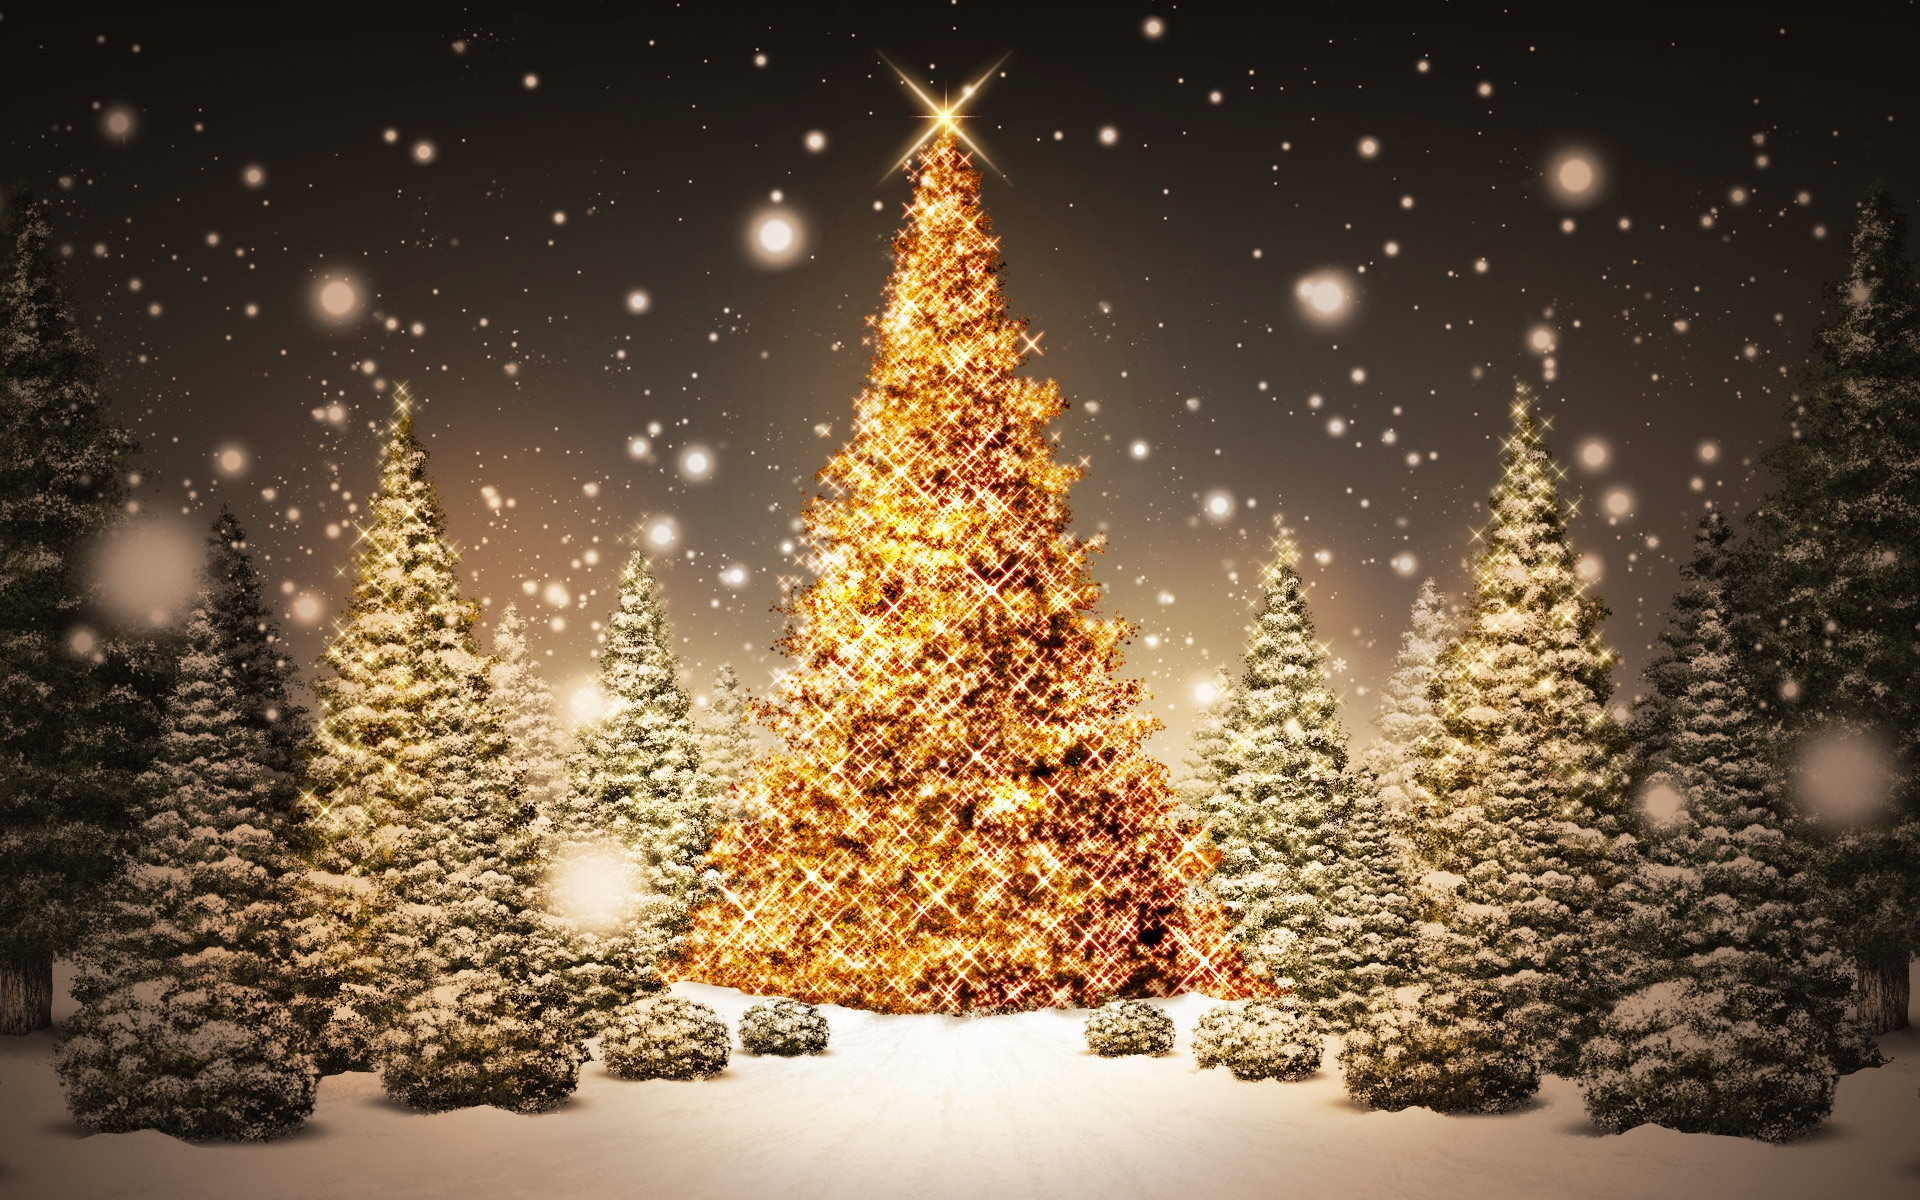  Wallpapers Free 3d Christmas Tree Backgrounds Desktop Wallpapers